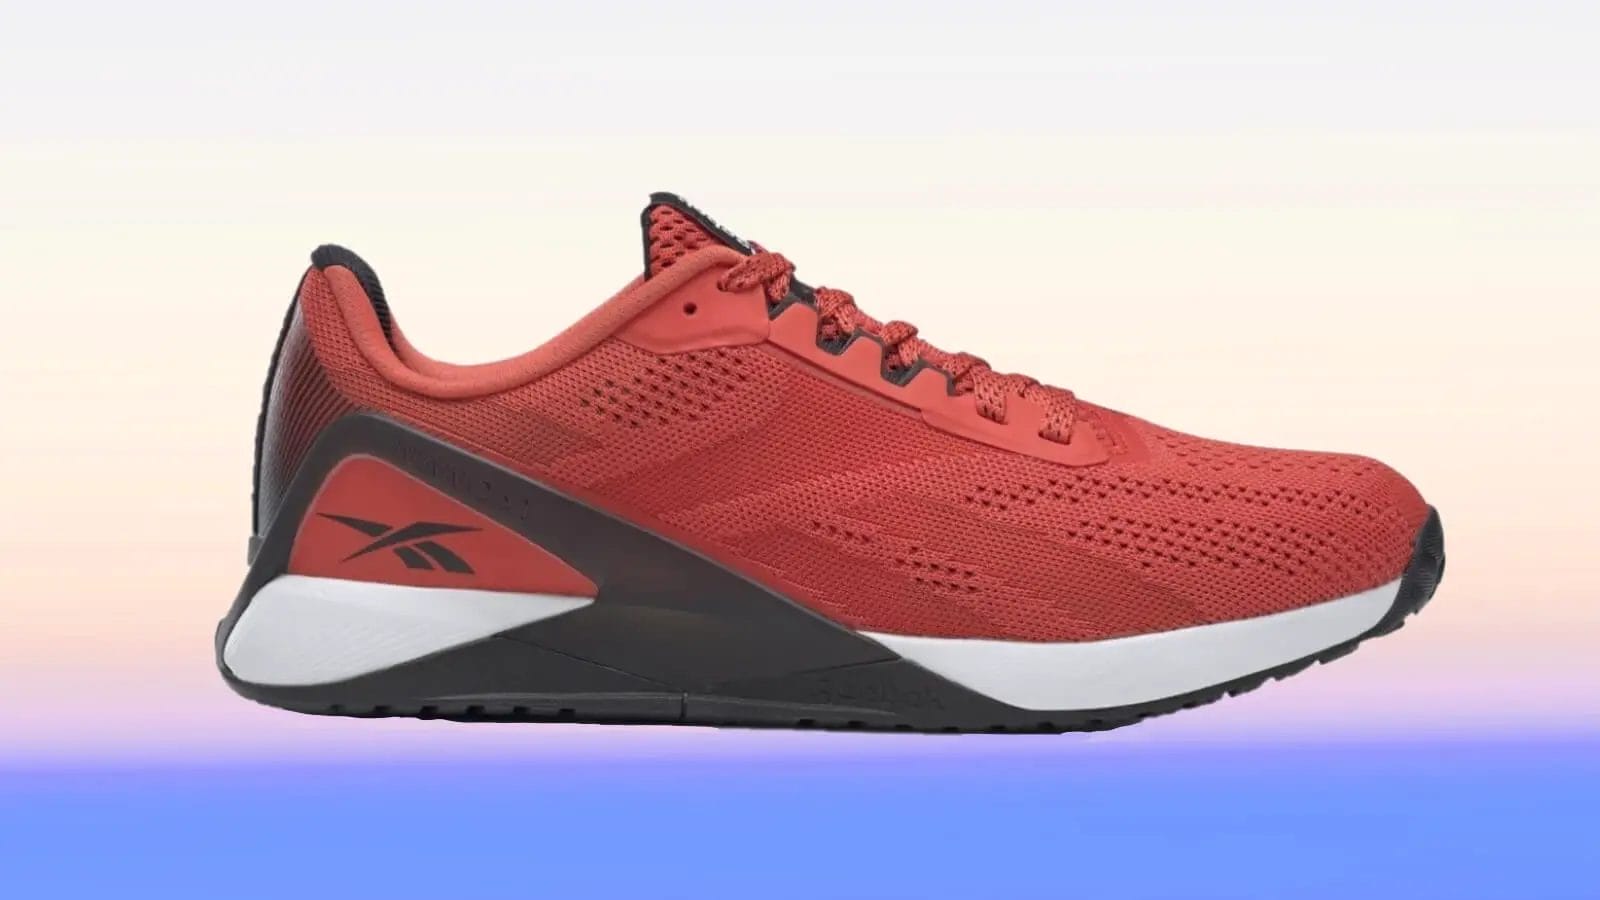 Red and White Reebok Nano X1 profile view showing reinforced heel cup for lateral stability.